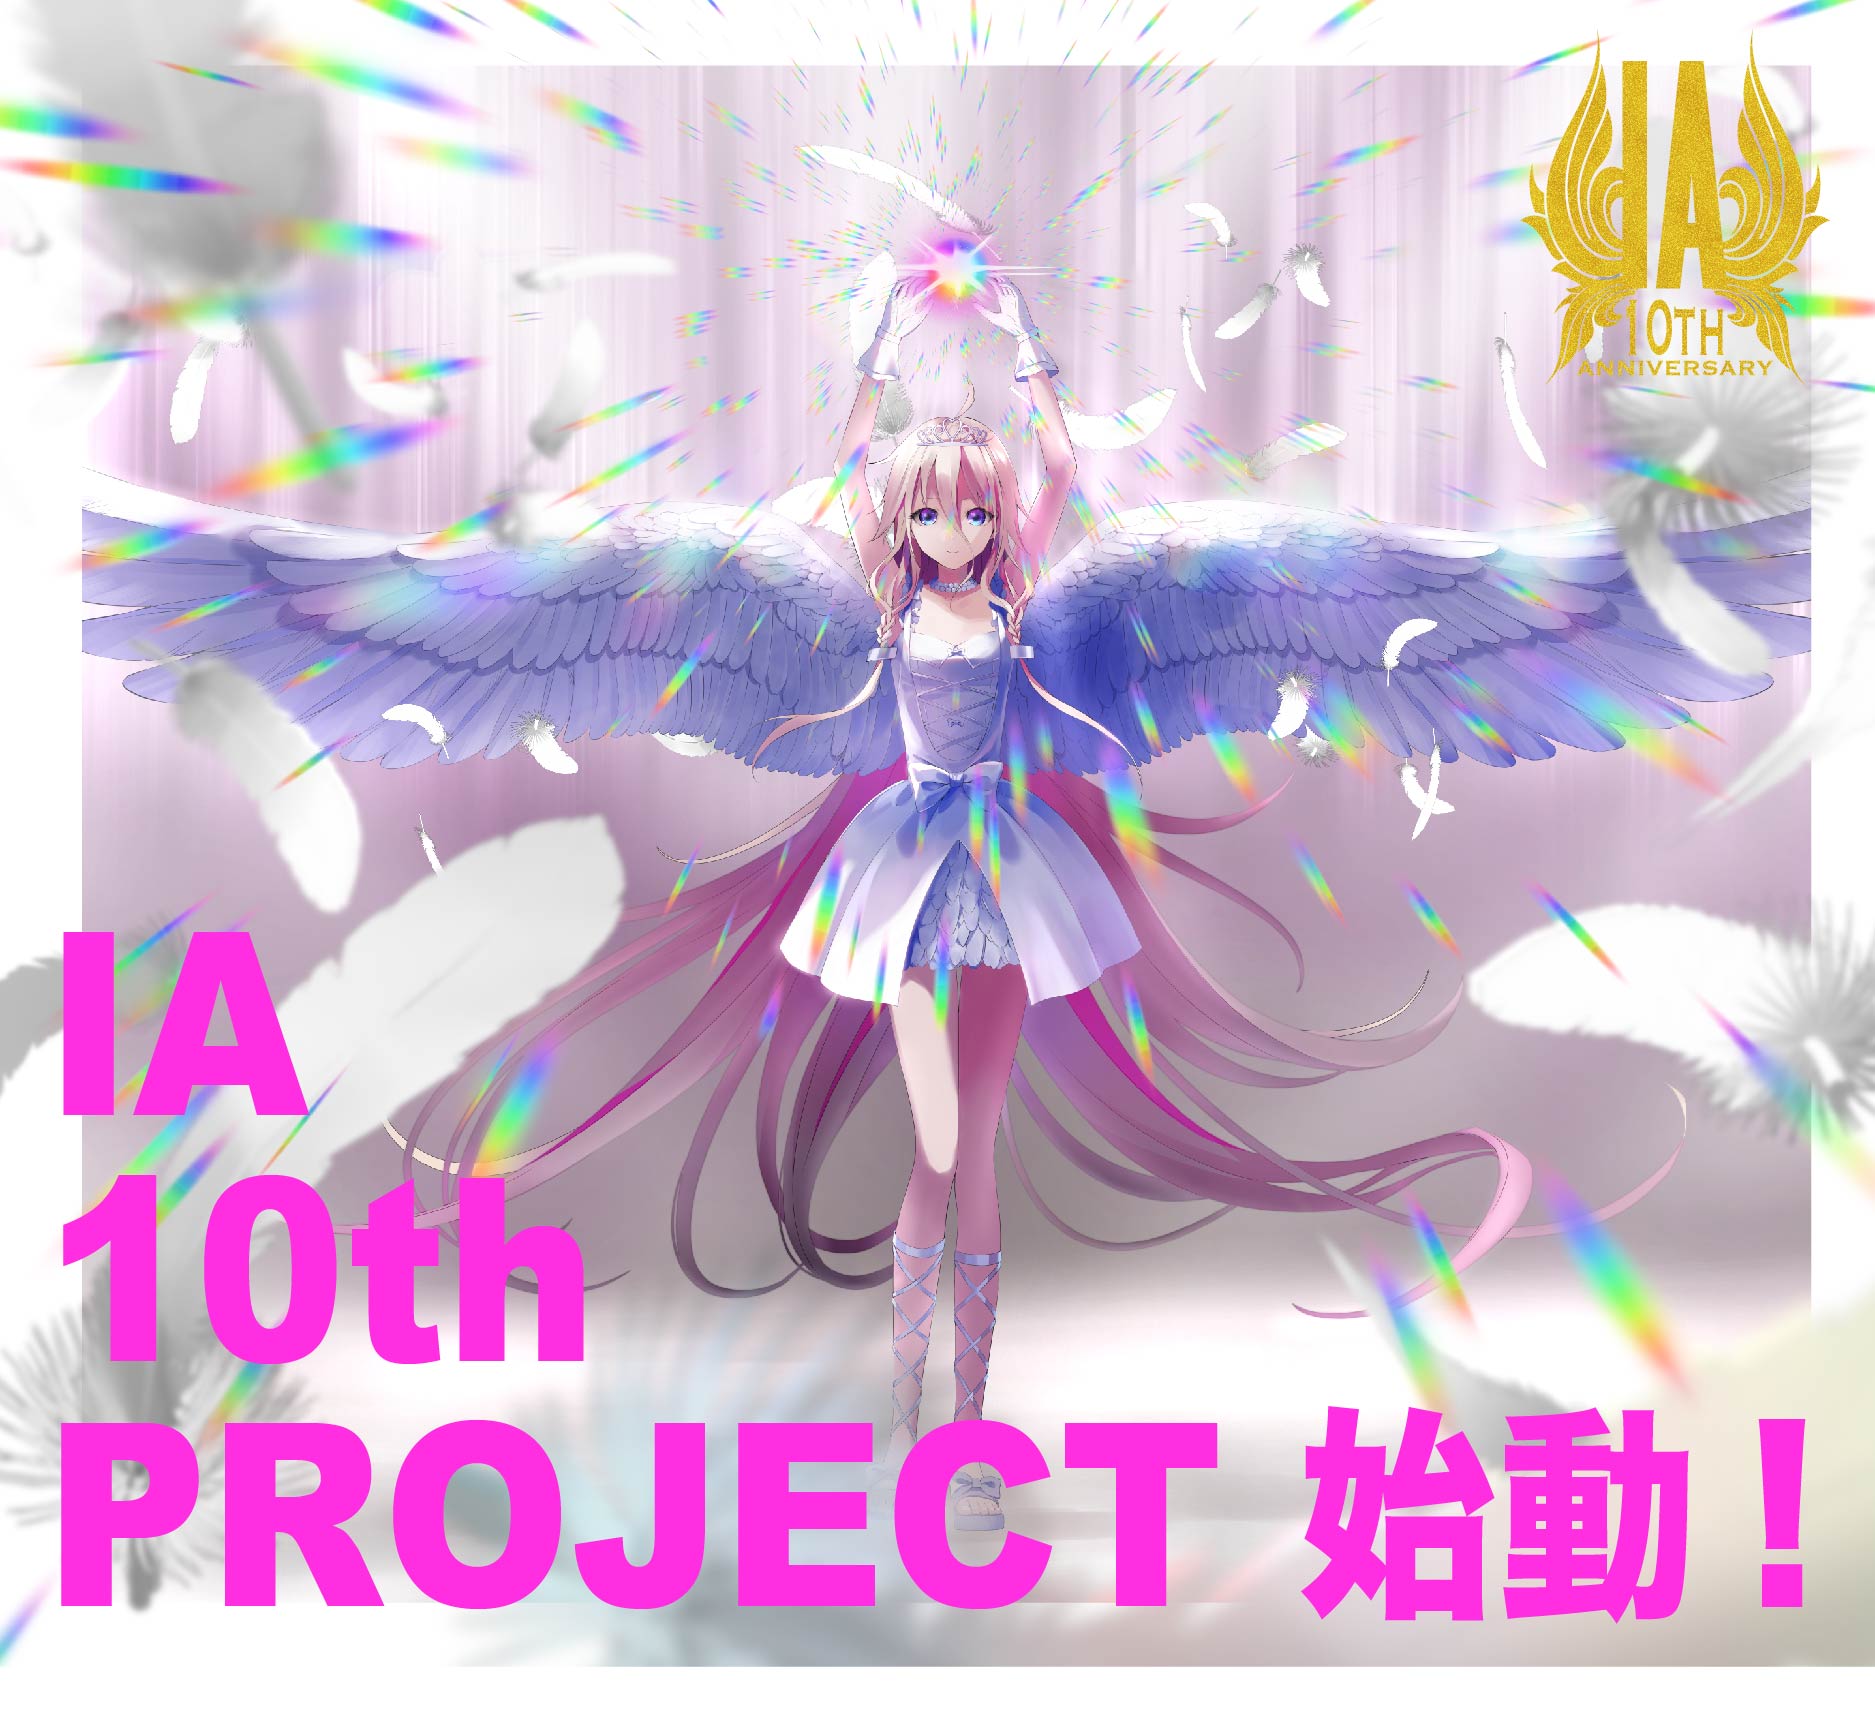 IA 10th PROJECTが遂に始動！特別番組を7月29日に開催！